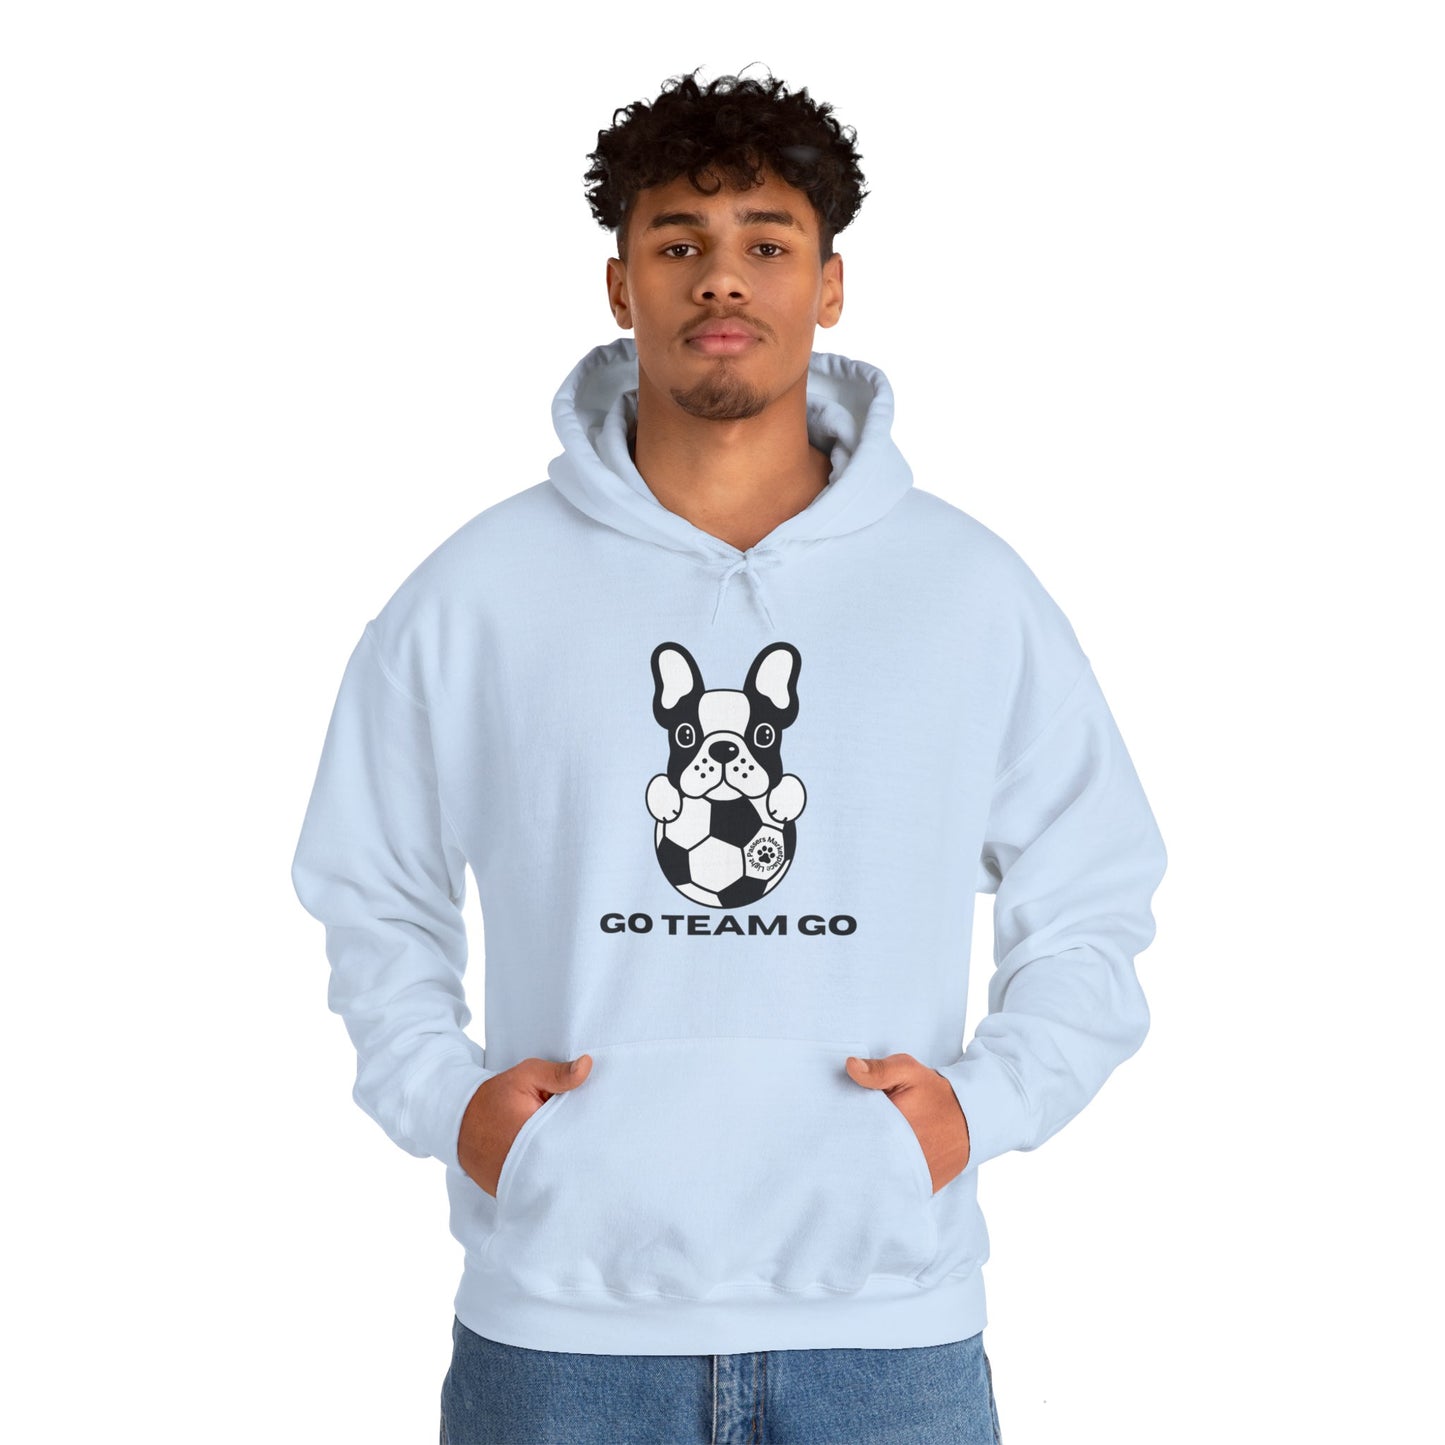 Light Passers Marketplace Soccer Dog Unisex Heavy Hooded Sweatshirt, Fitness, Mental Health, Simple Messages